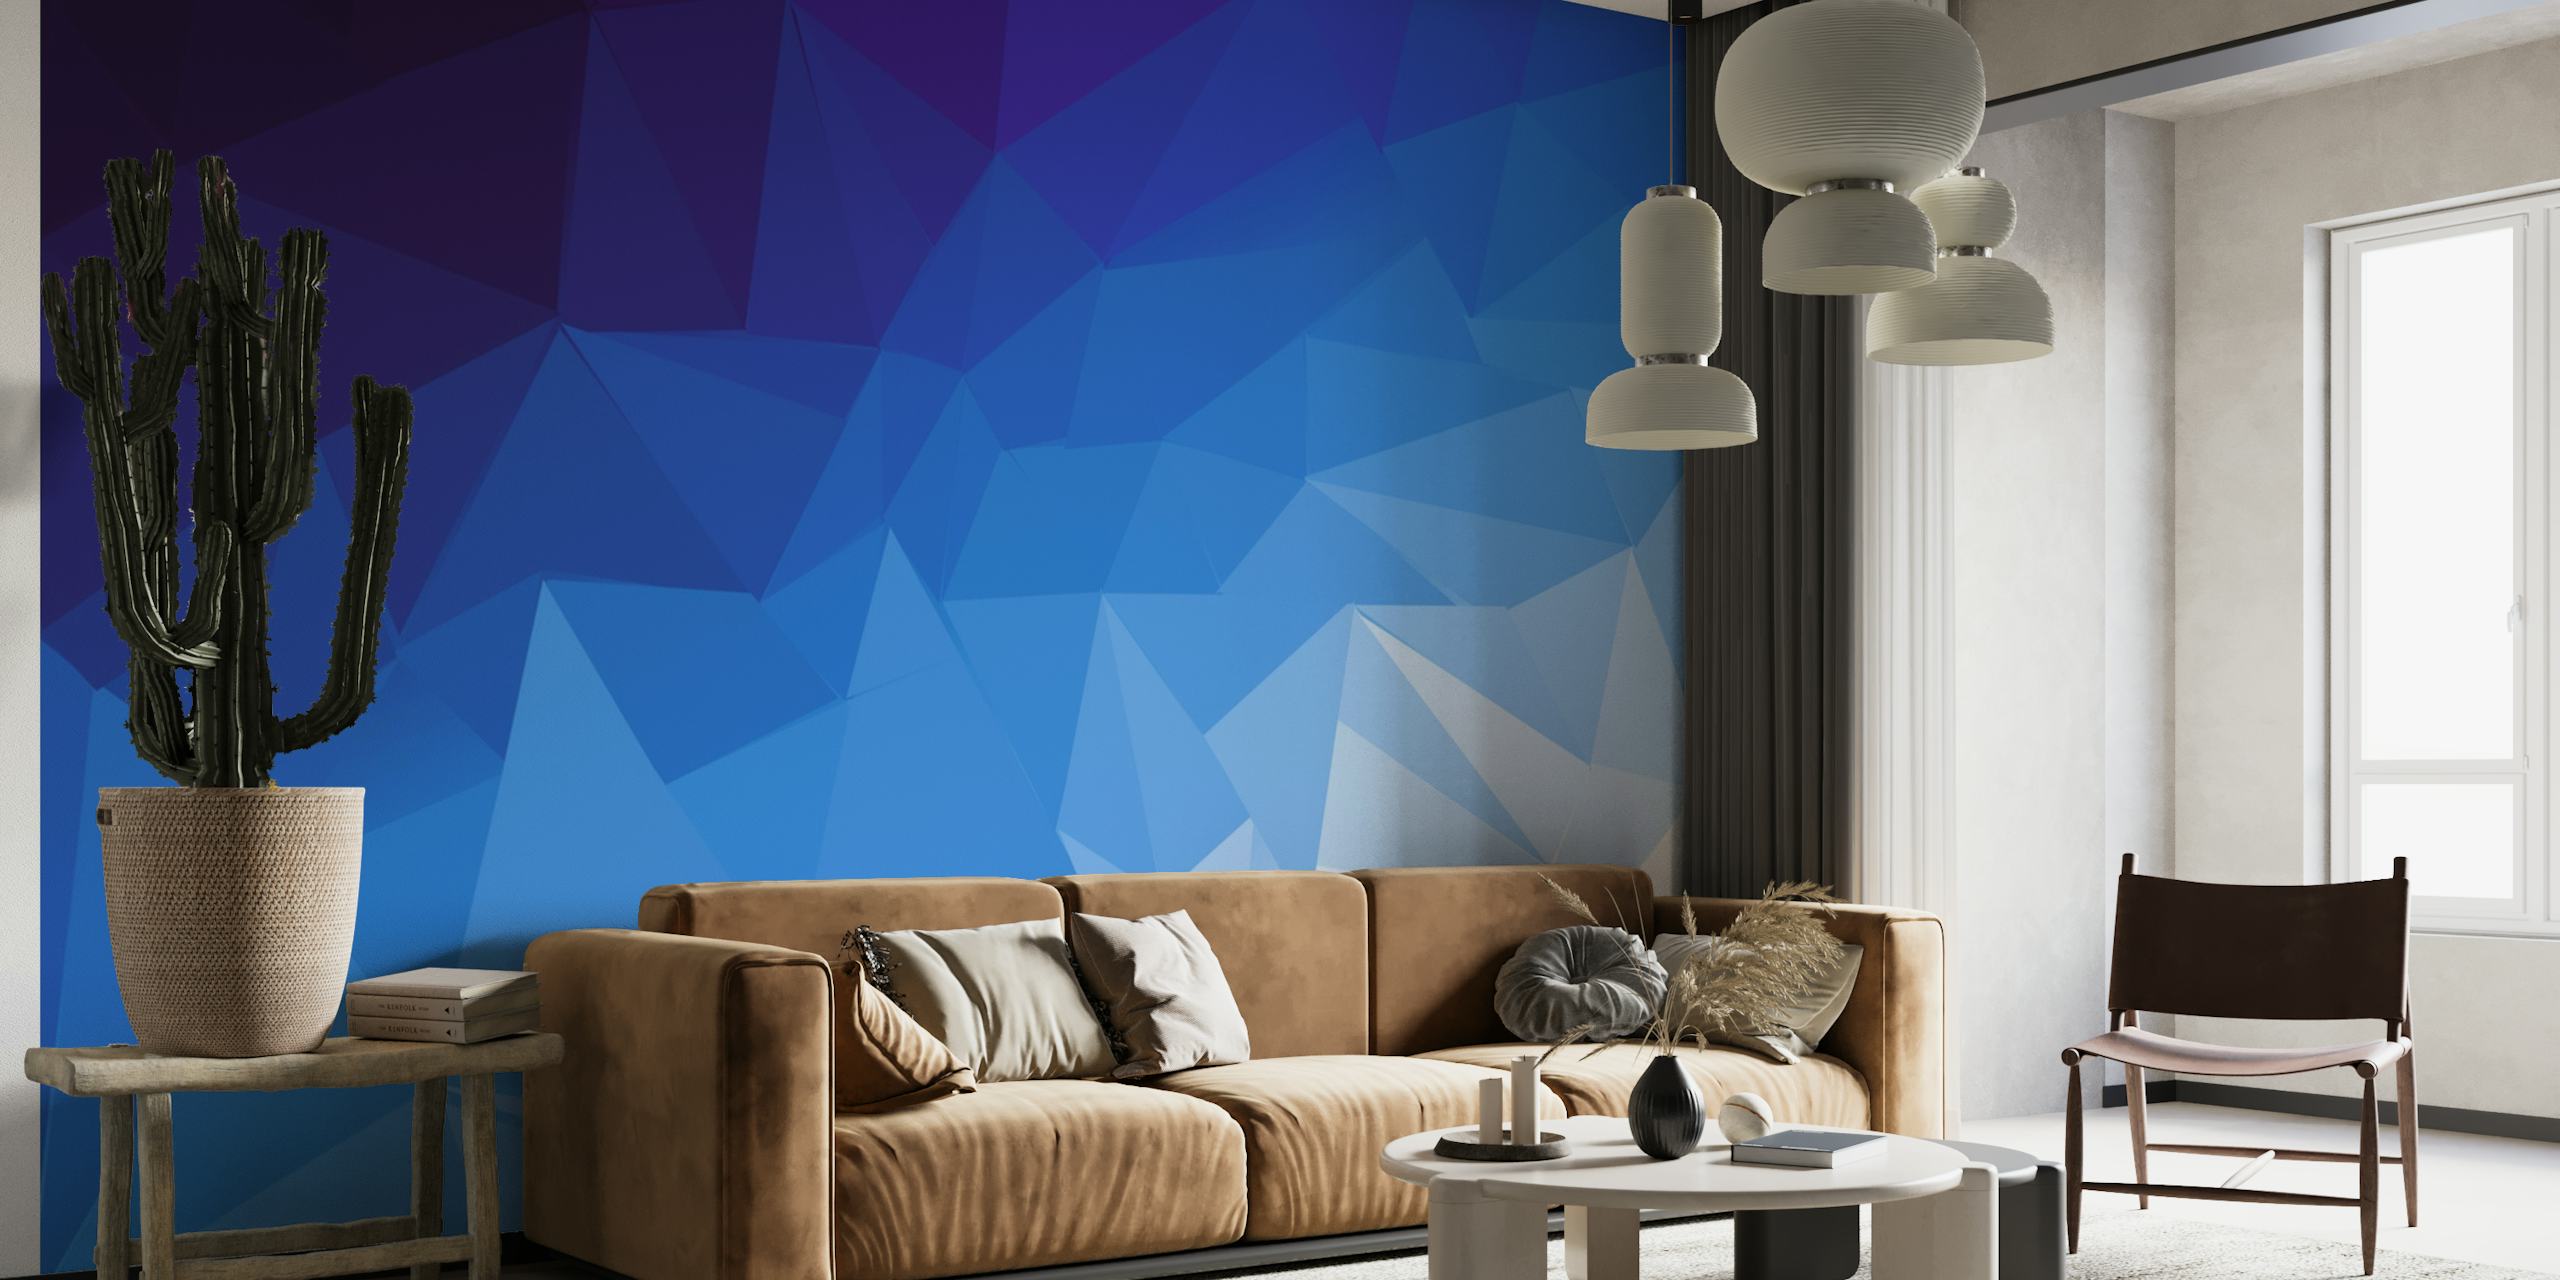 Abstract geometric ocean-inspired wall mural in shades of blue.